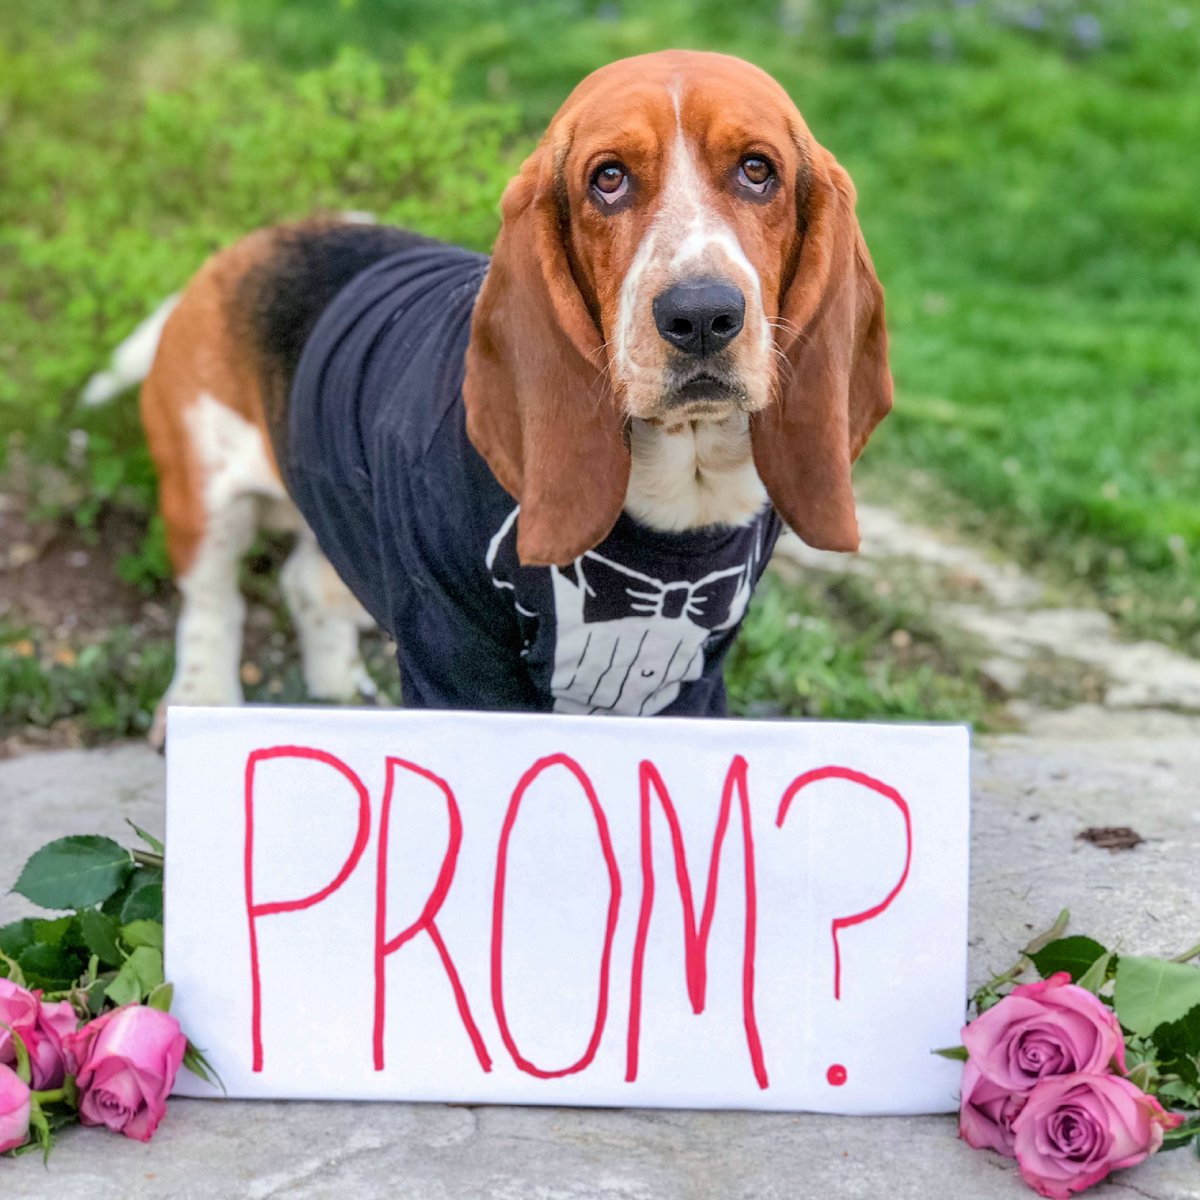 Are there any single ladies needing a date to Prom? 🌹🤵🏻‍♂️ #popthequestion #prom #date #promnight #promking #highschool #datenight #schooldance